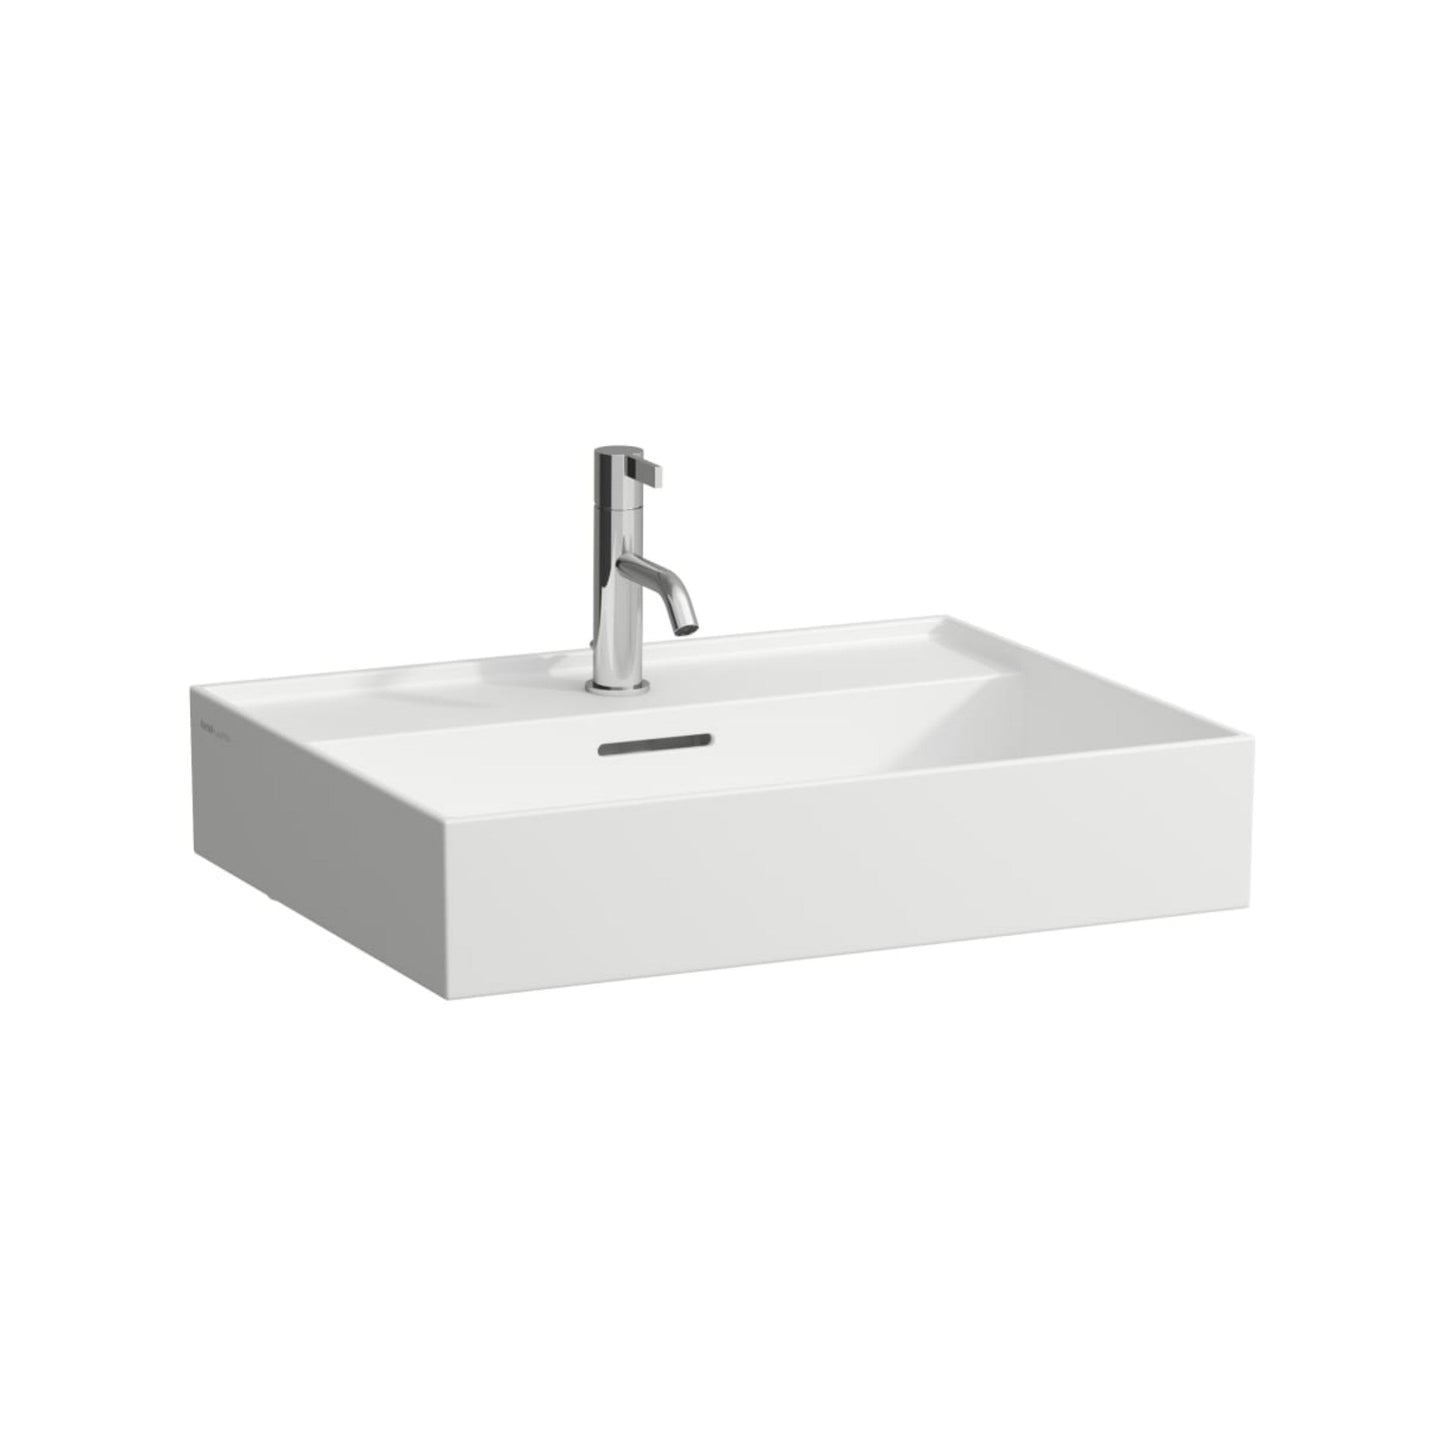 Laufen Kartell 24" x 18" Matte White Countertop Bathroom Sink With Faucet Hole